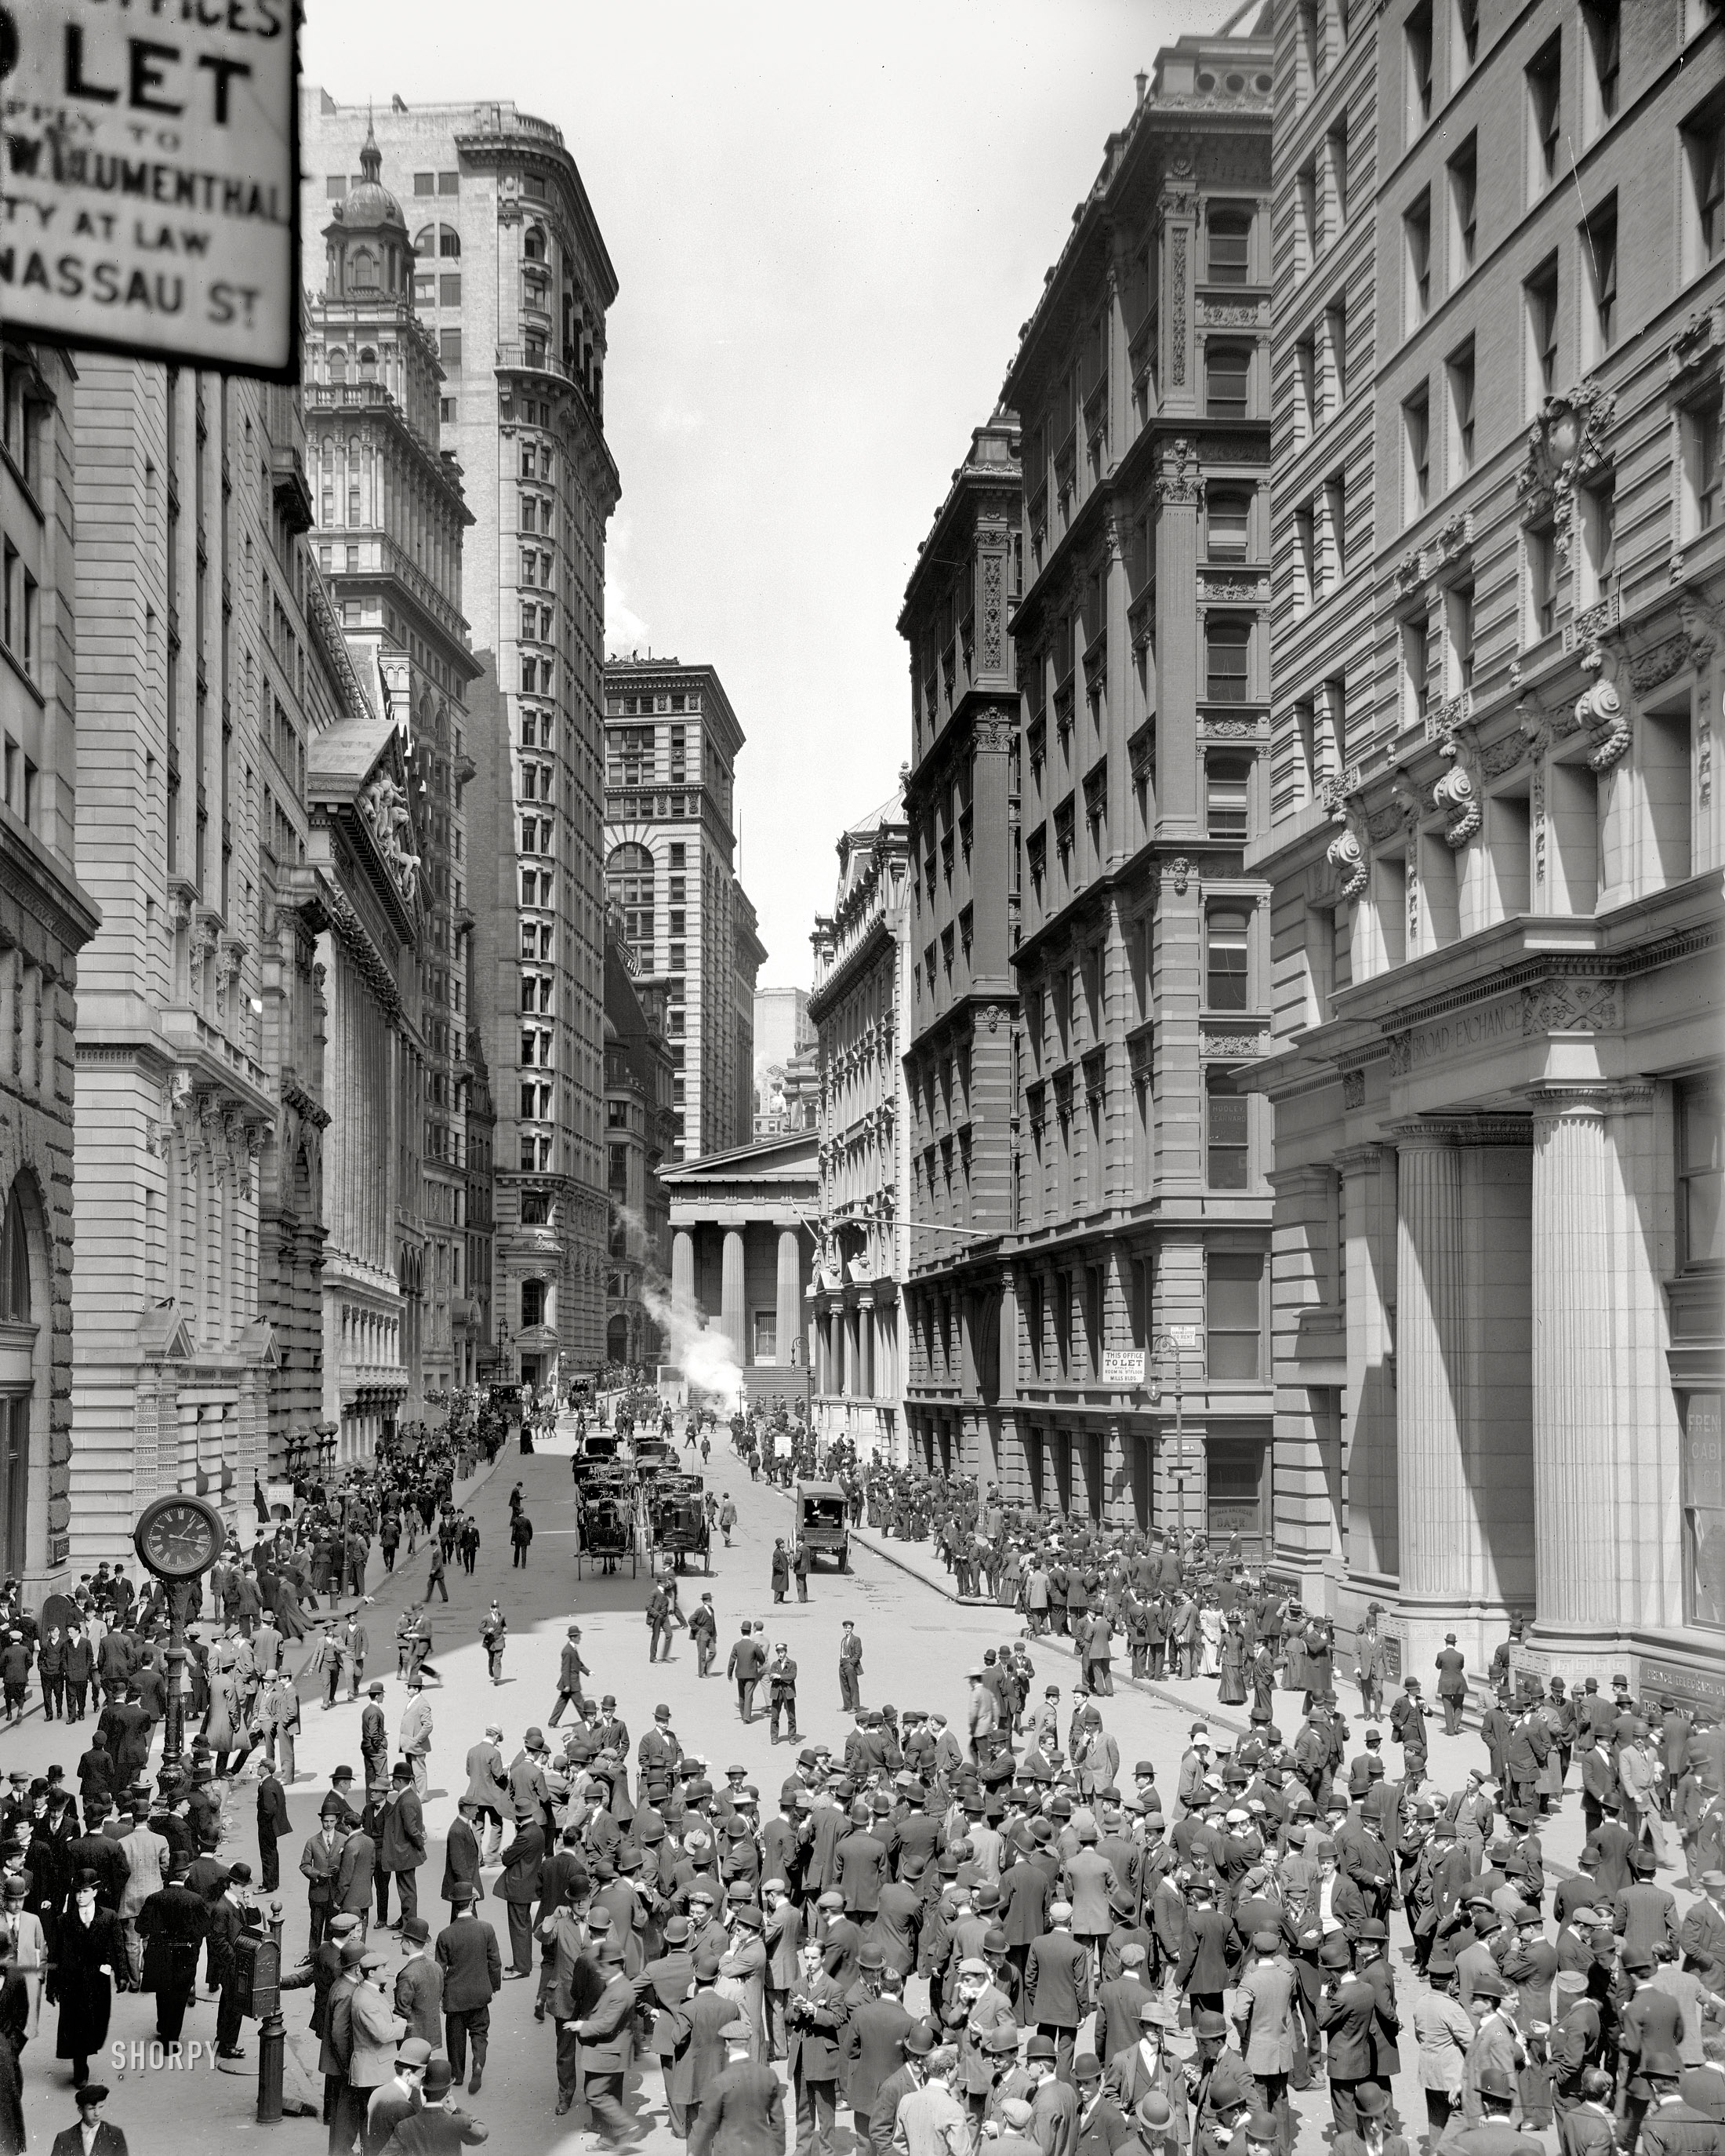 Lower Manhattan circa 1906. "Broad Street and curb market, New York." 8x10 inch dry plate glass negative, Detroit Publishing Company. View full size.